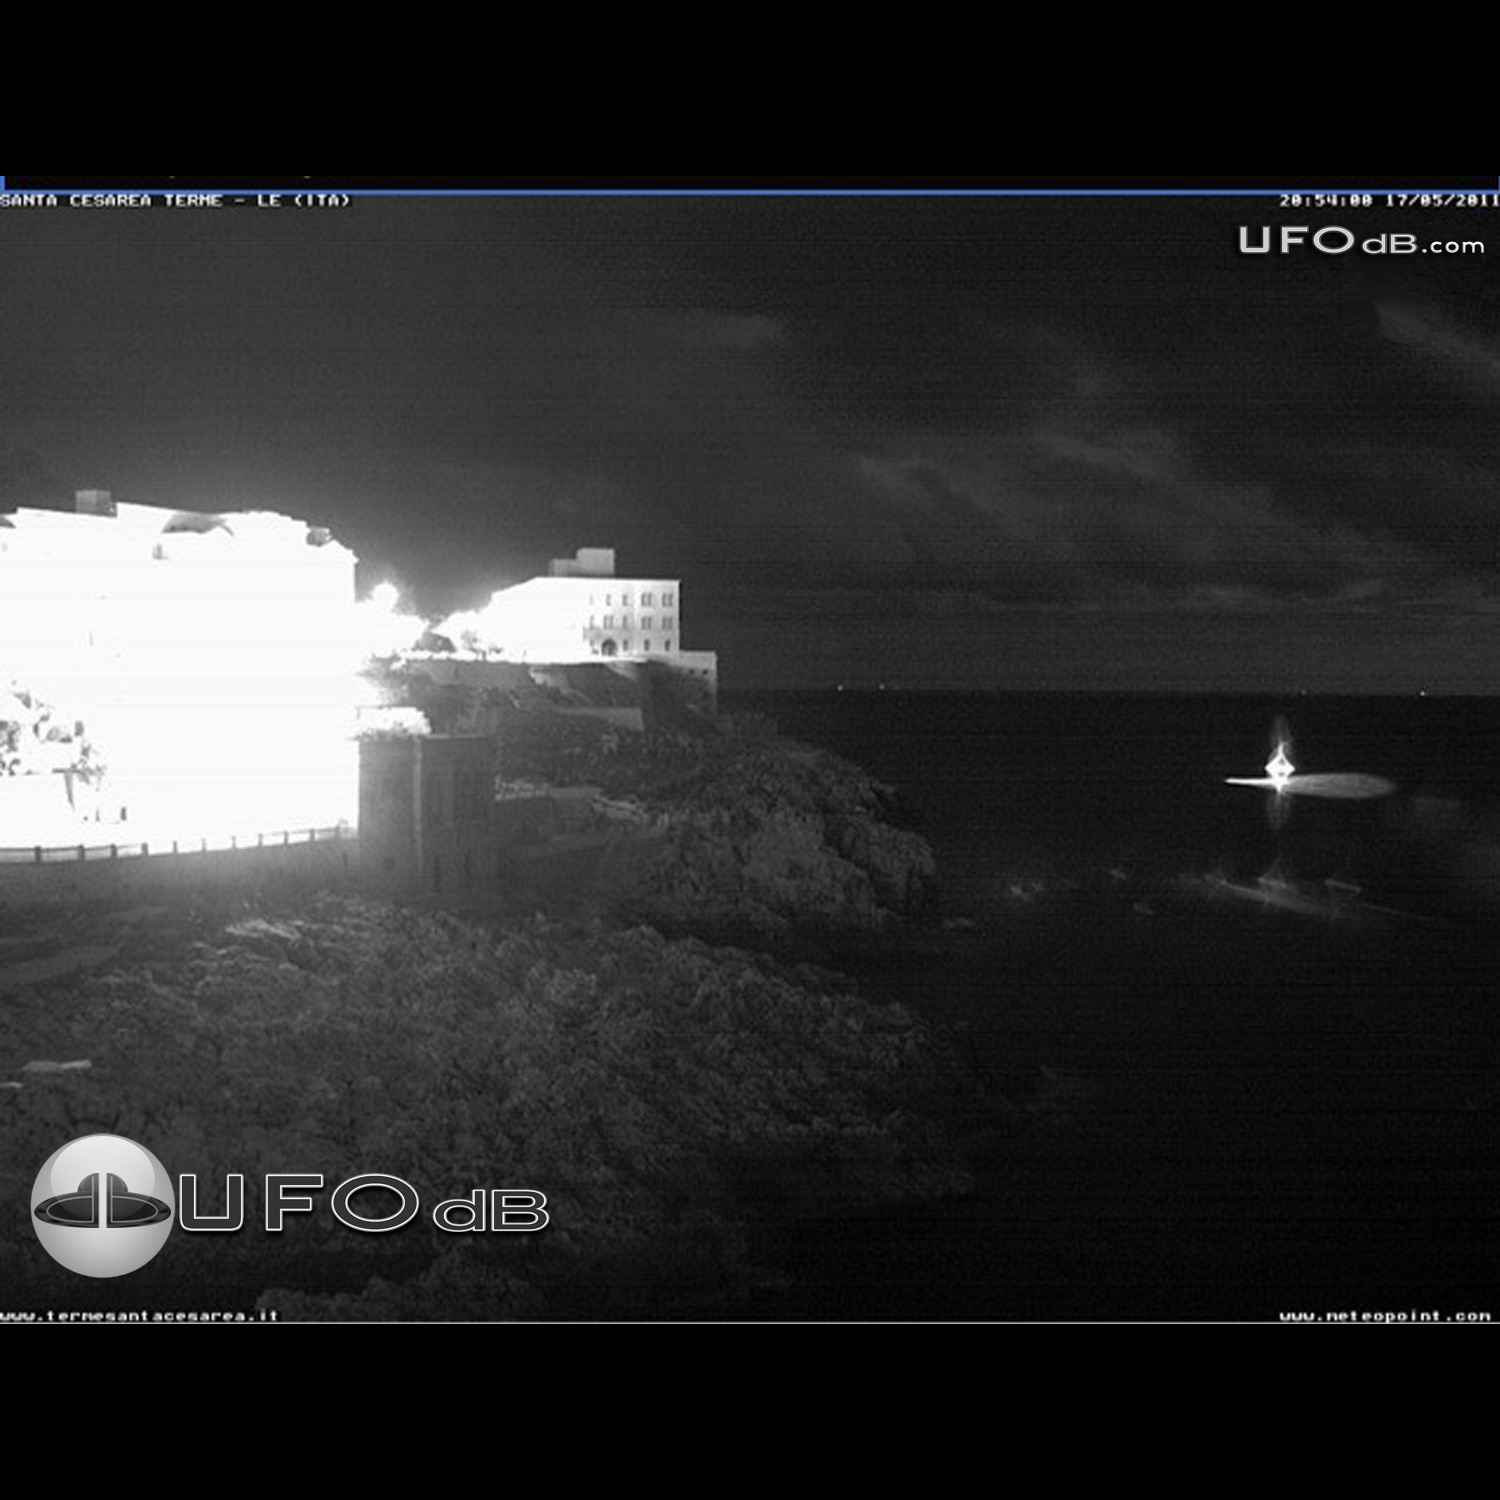 Santa Cesarea Terme floating UFO caught on Cam | Italy | May 17 2011 UFO Picture #295-1